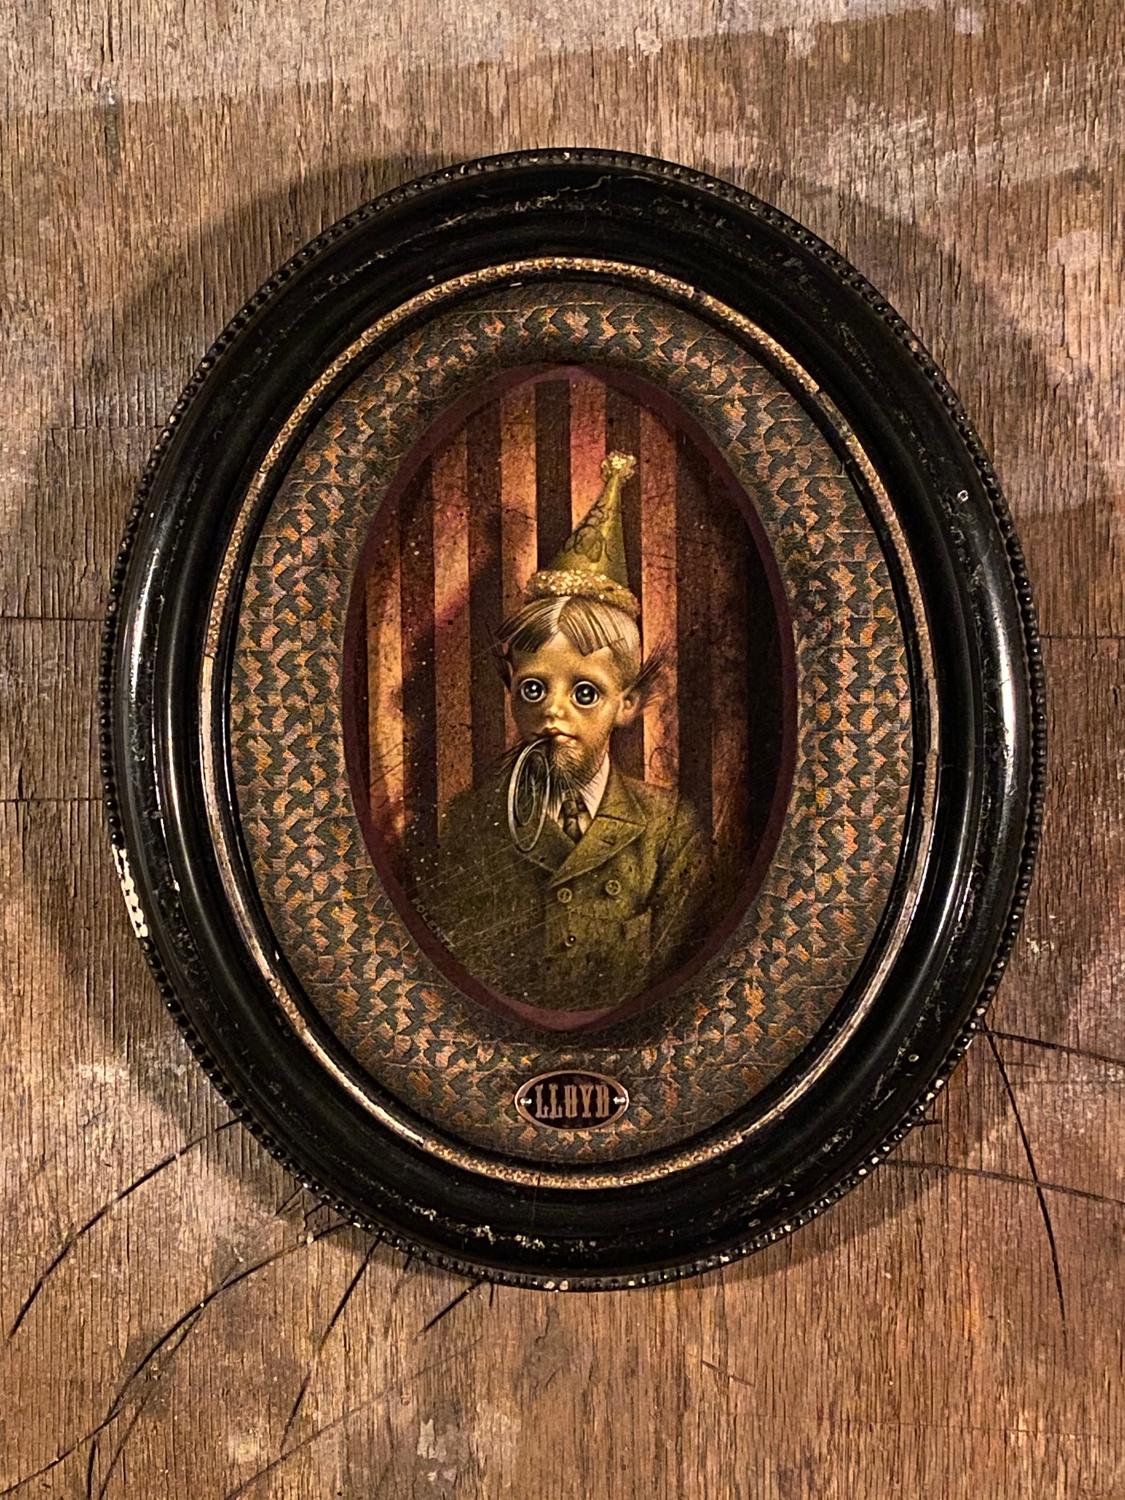 A 10” x 12” x 1” Surrealist Acrylic Portrait Painting by artist Christopher Polentz. A certificate of authenticity will accompany the piece upon its purchase or delivery.

Mothboy: We all refer to it as “That Night” when Lloyd came to be a part of